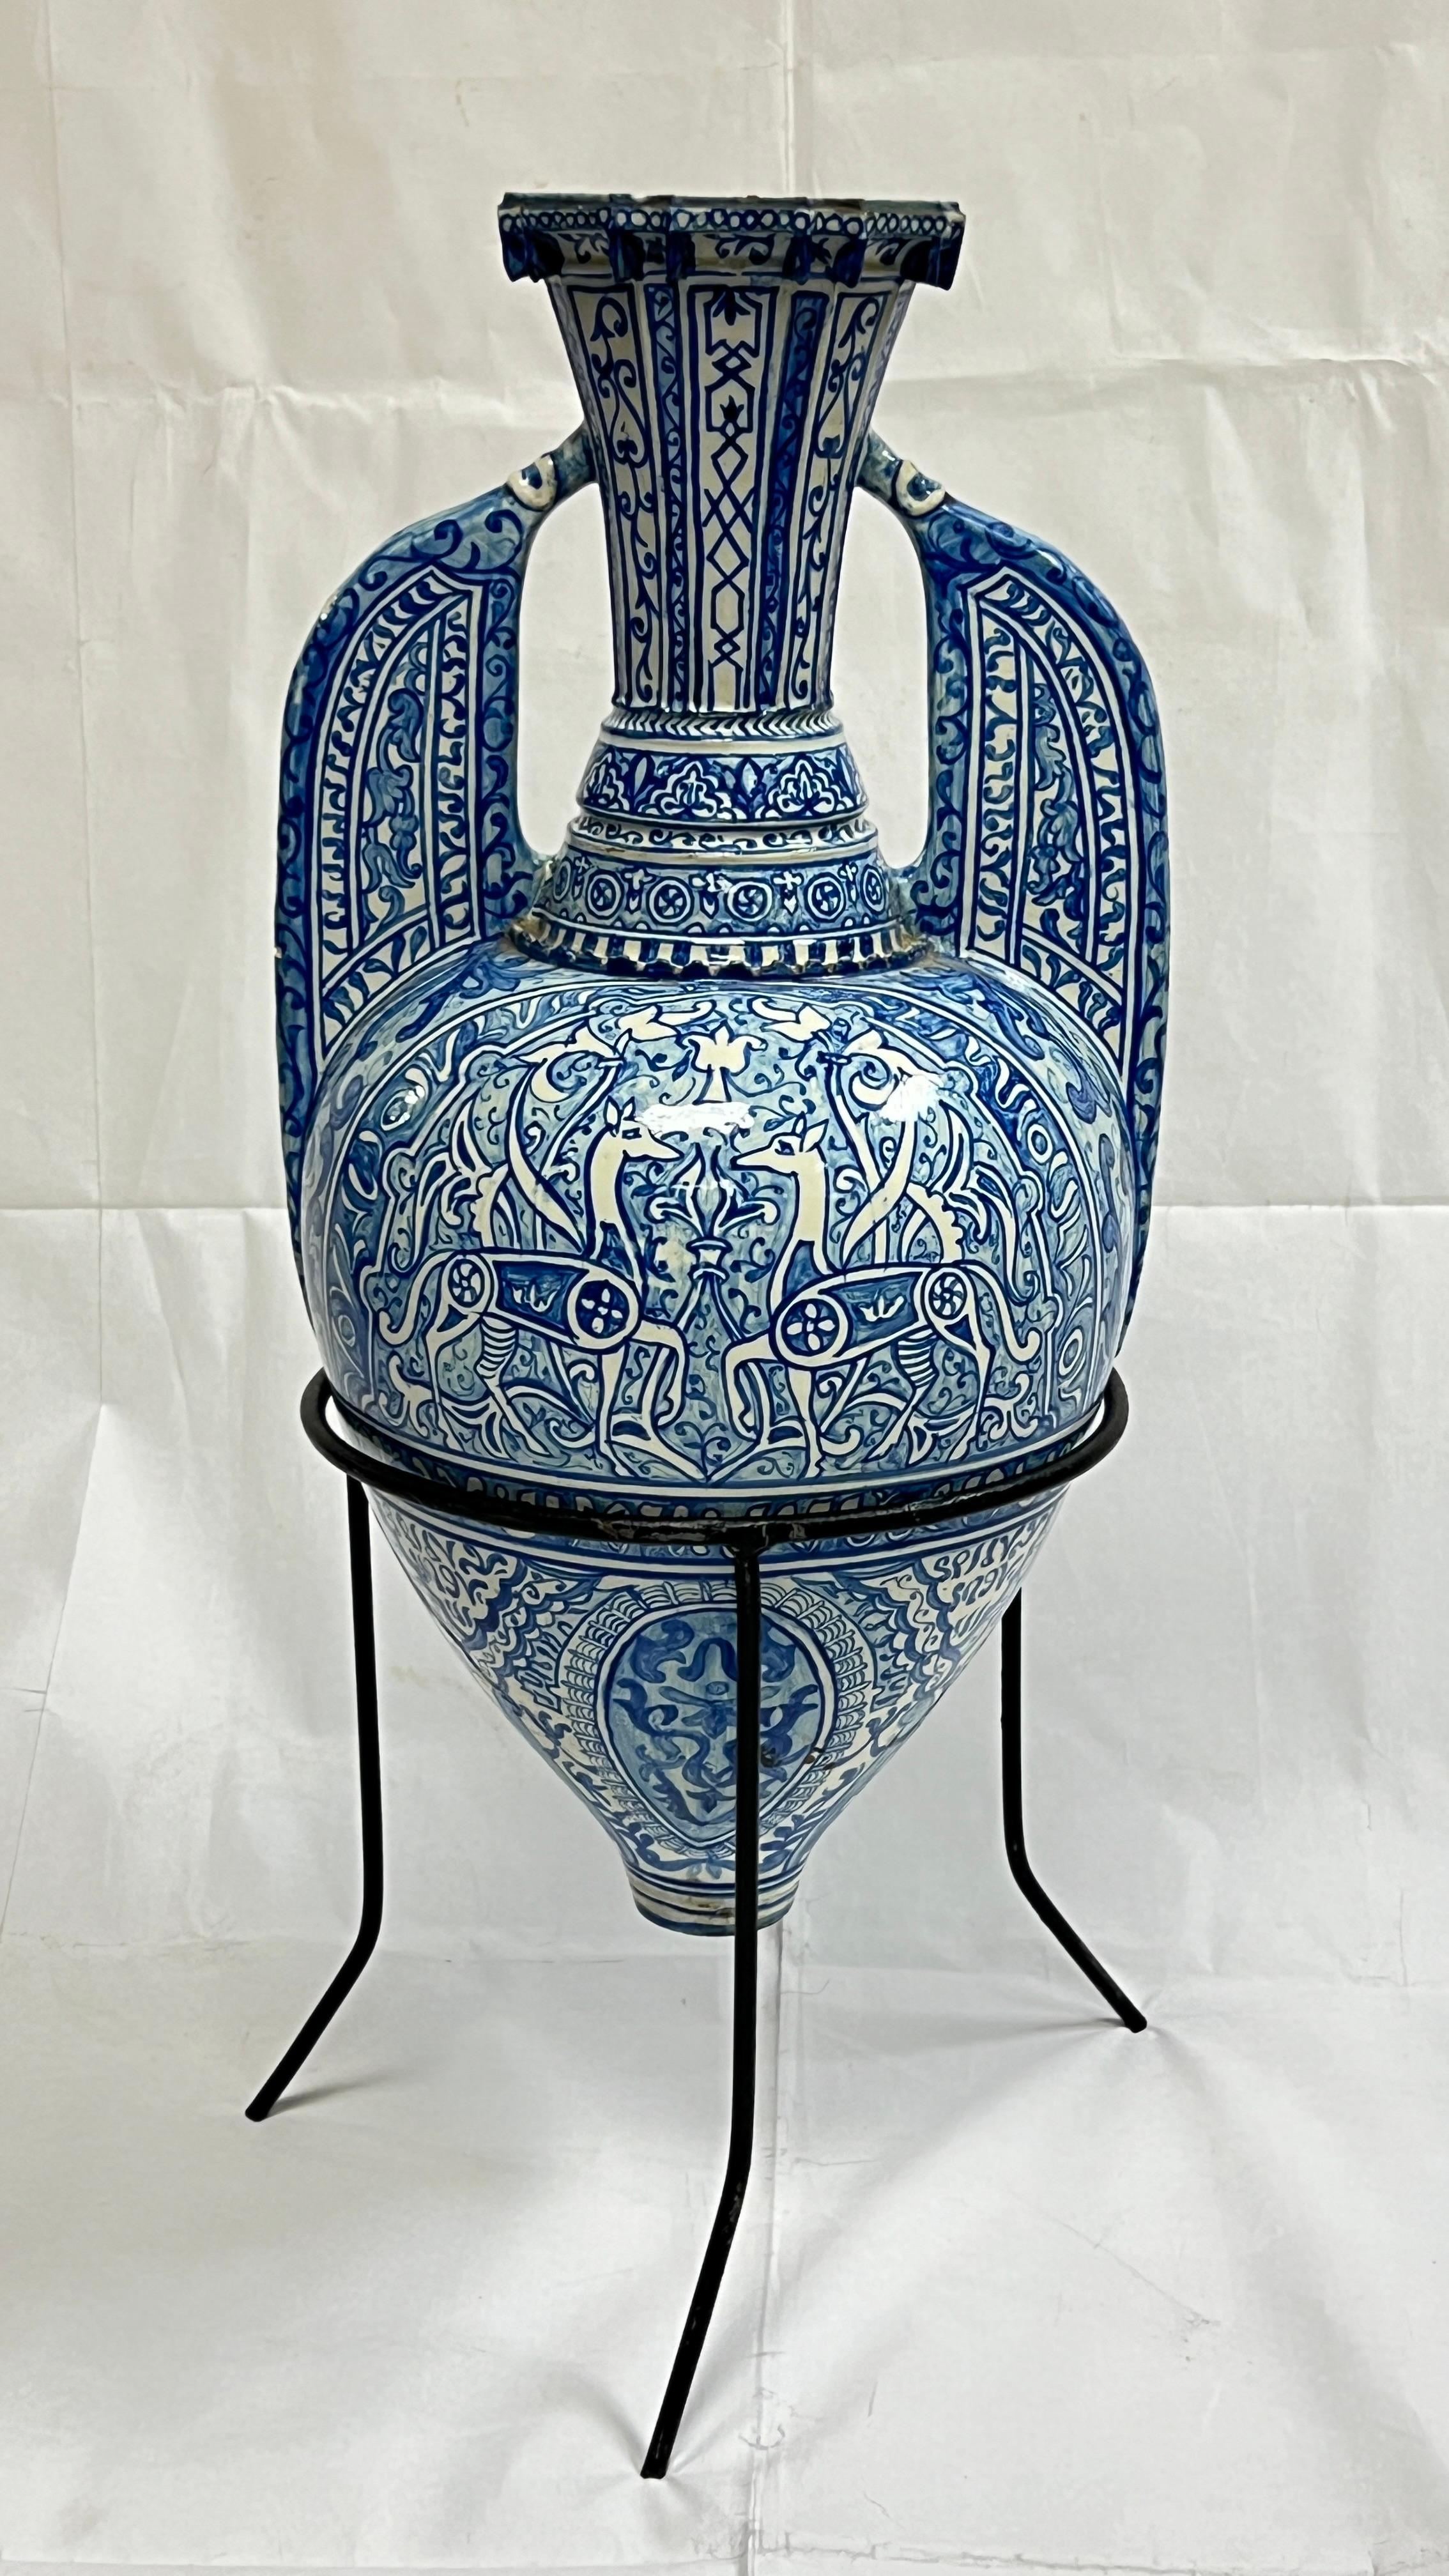 Antique 19th century Hispano-Moresque tin-glazed earthenware amphora vase with hand-painted cobalt blue designs of deer and flowers, with later iron stand.  Vase 21 inches tall and 25.5 inches mounted on stand.